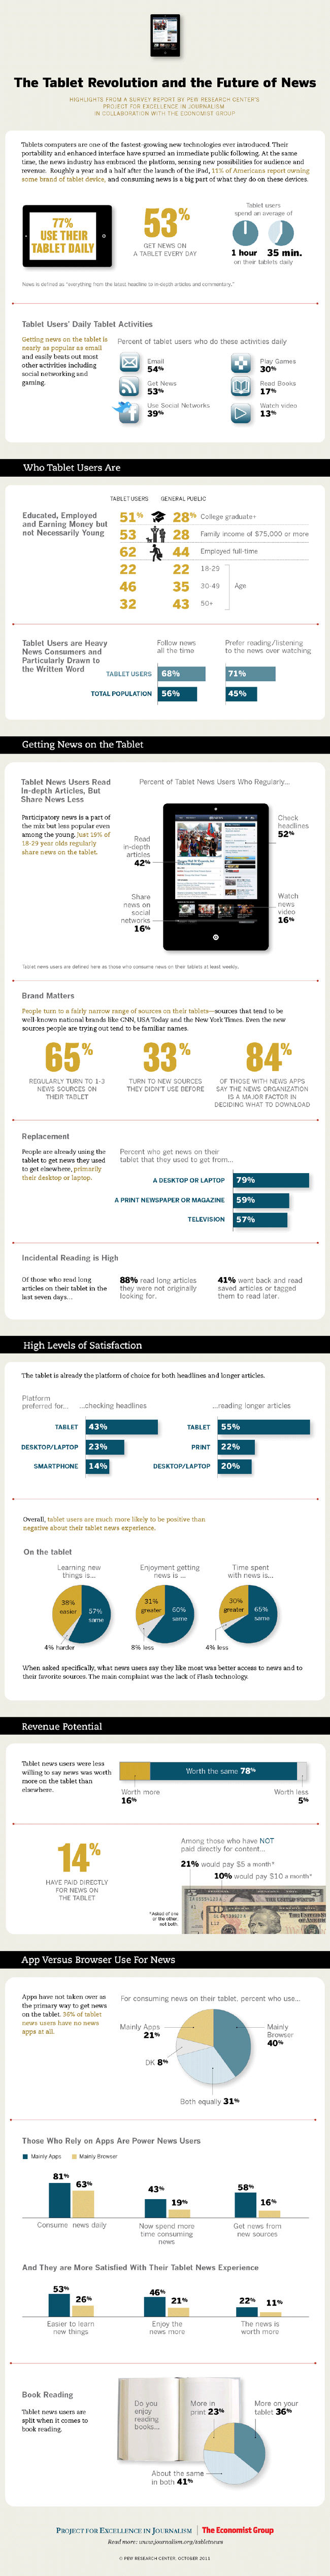 Tablet Revolution by Pew Research